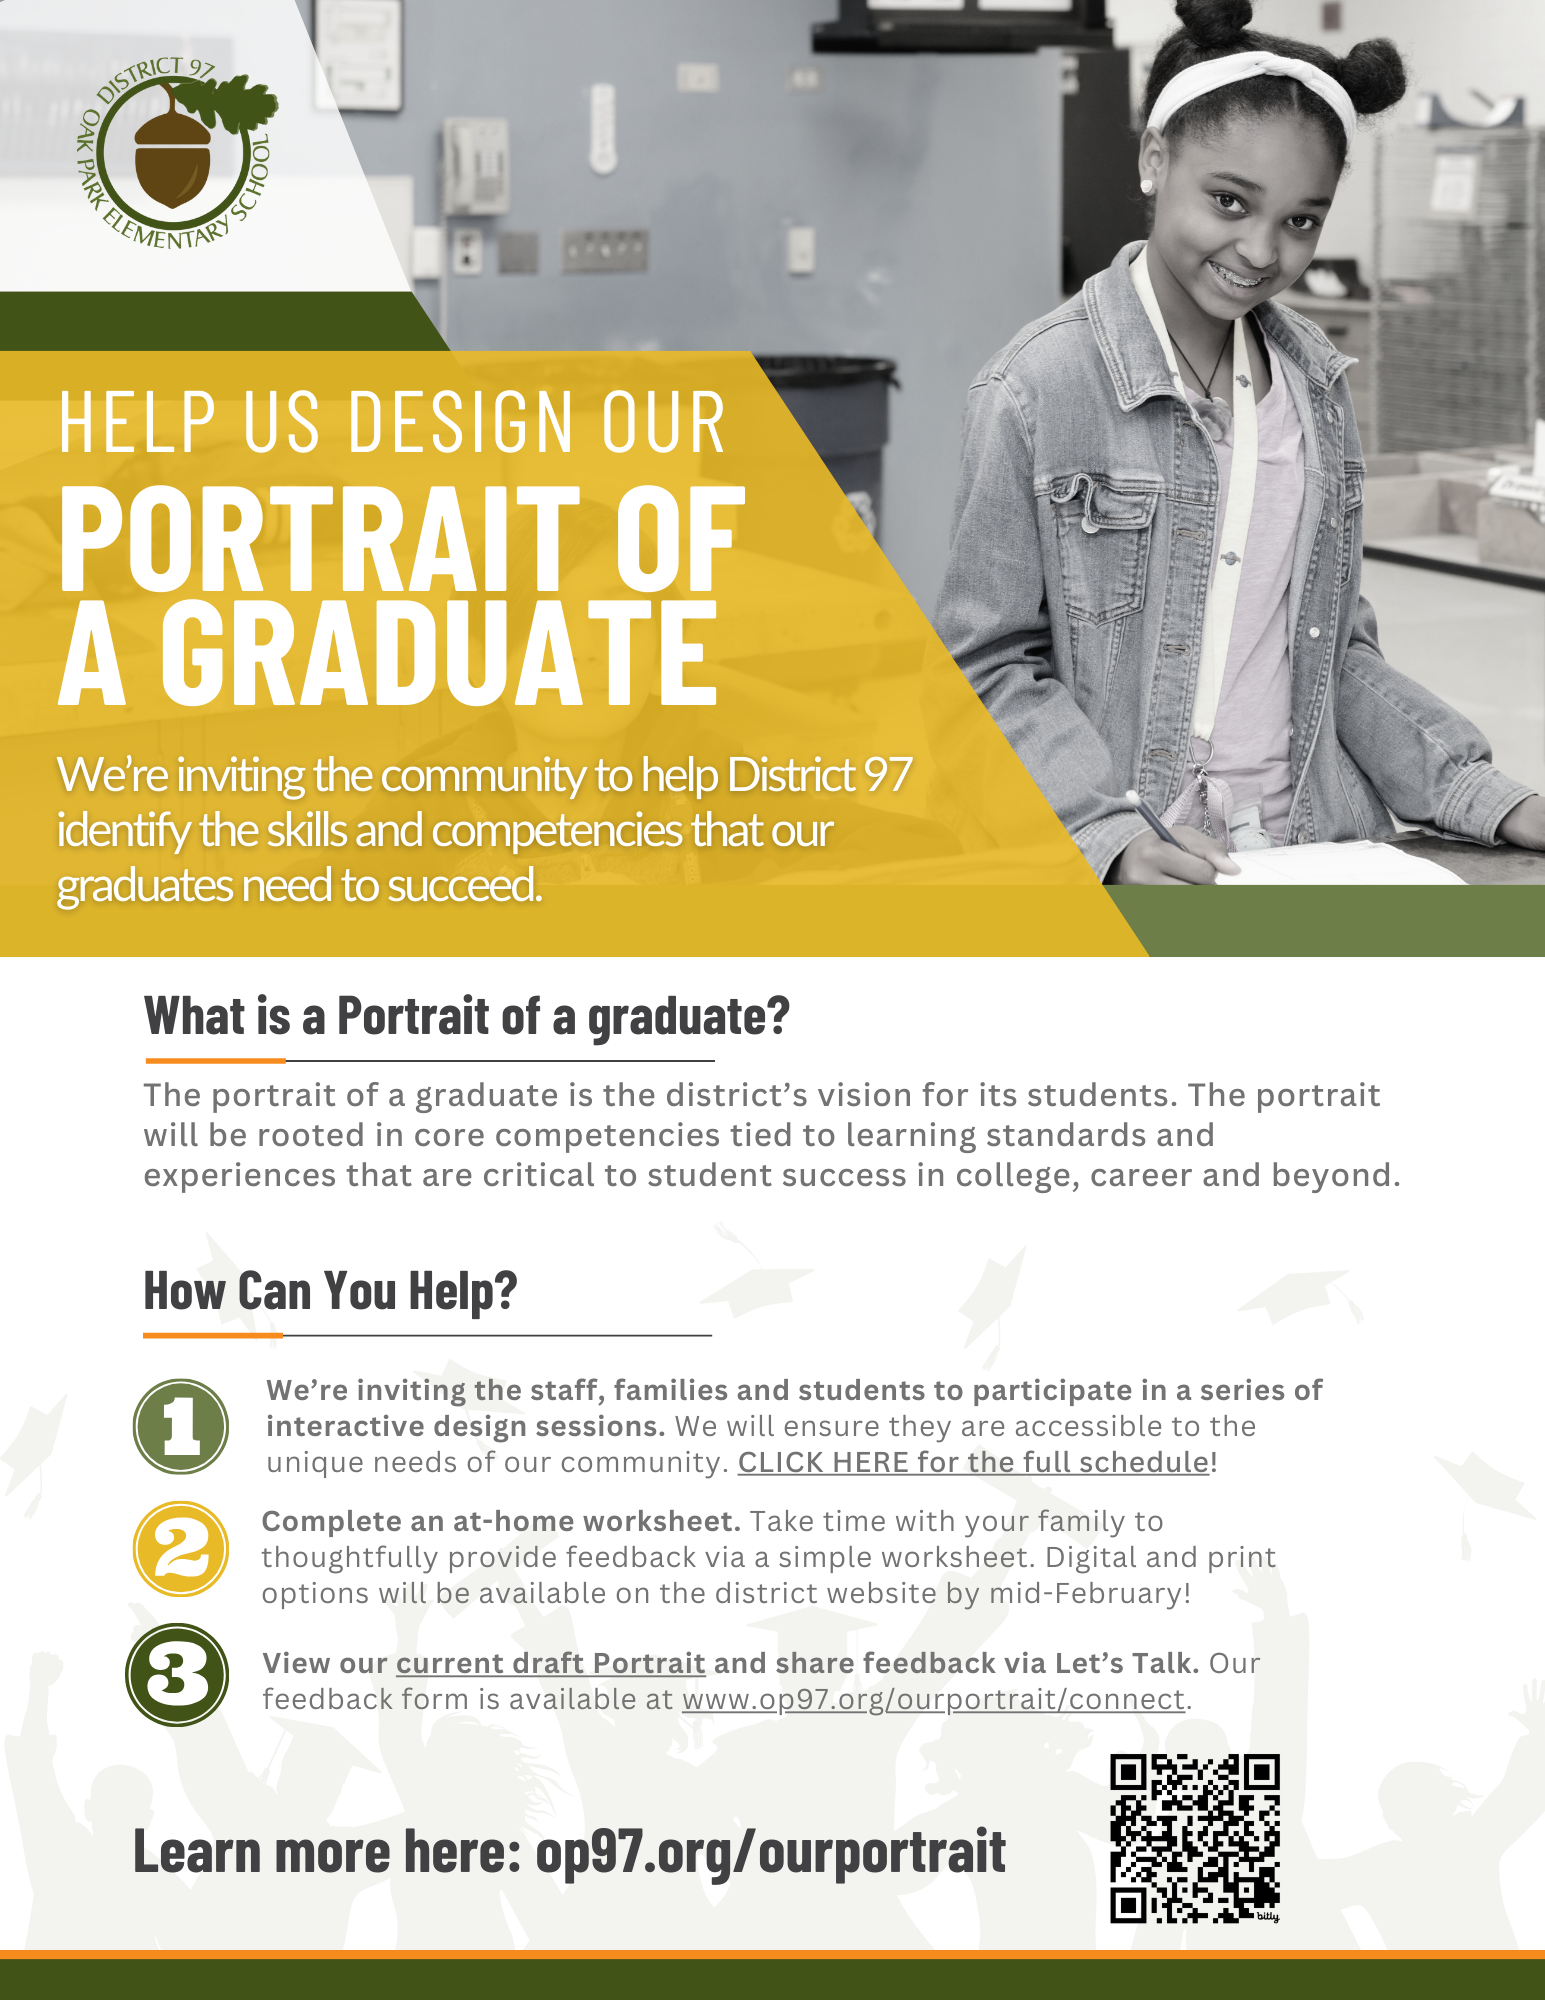 Click to view Version 1 of the Portrait of a Graduate